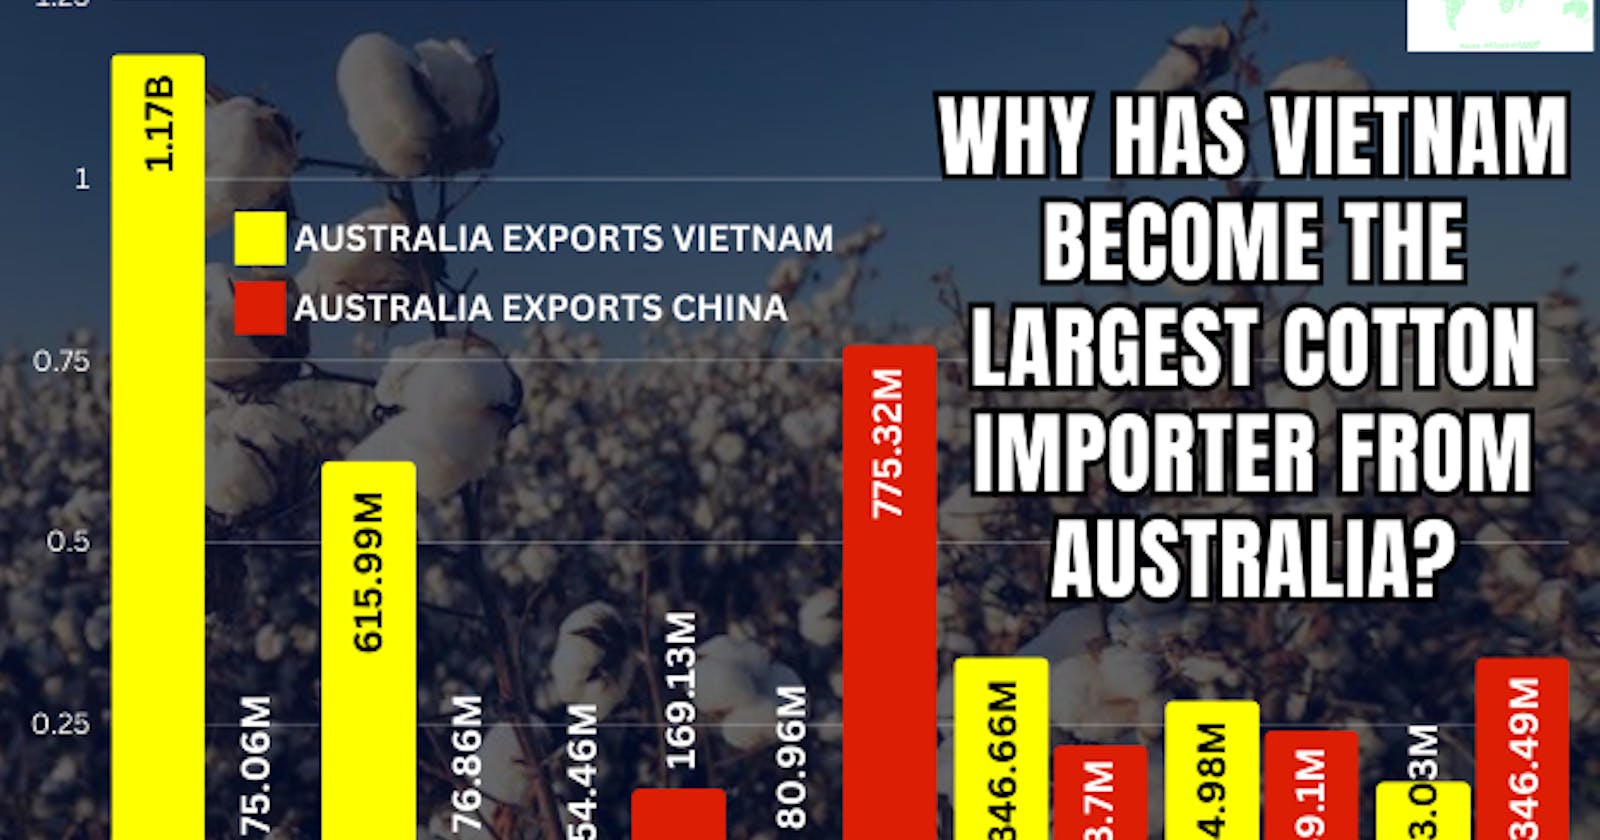 Why Has Vietnam Become The Largest Cotton Importer From Australia?